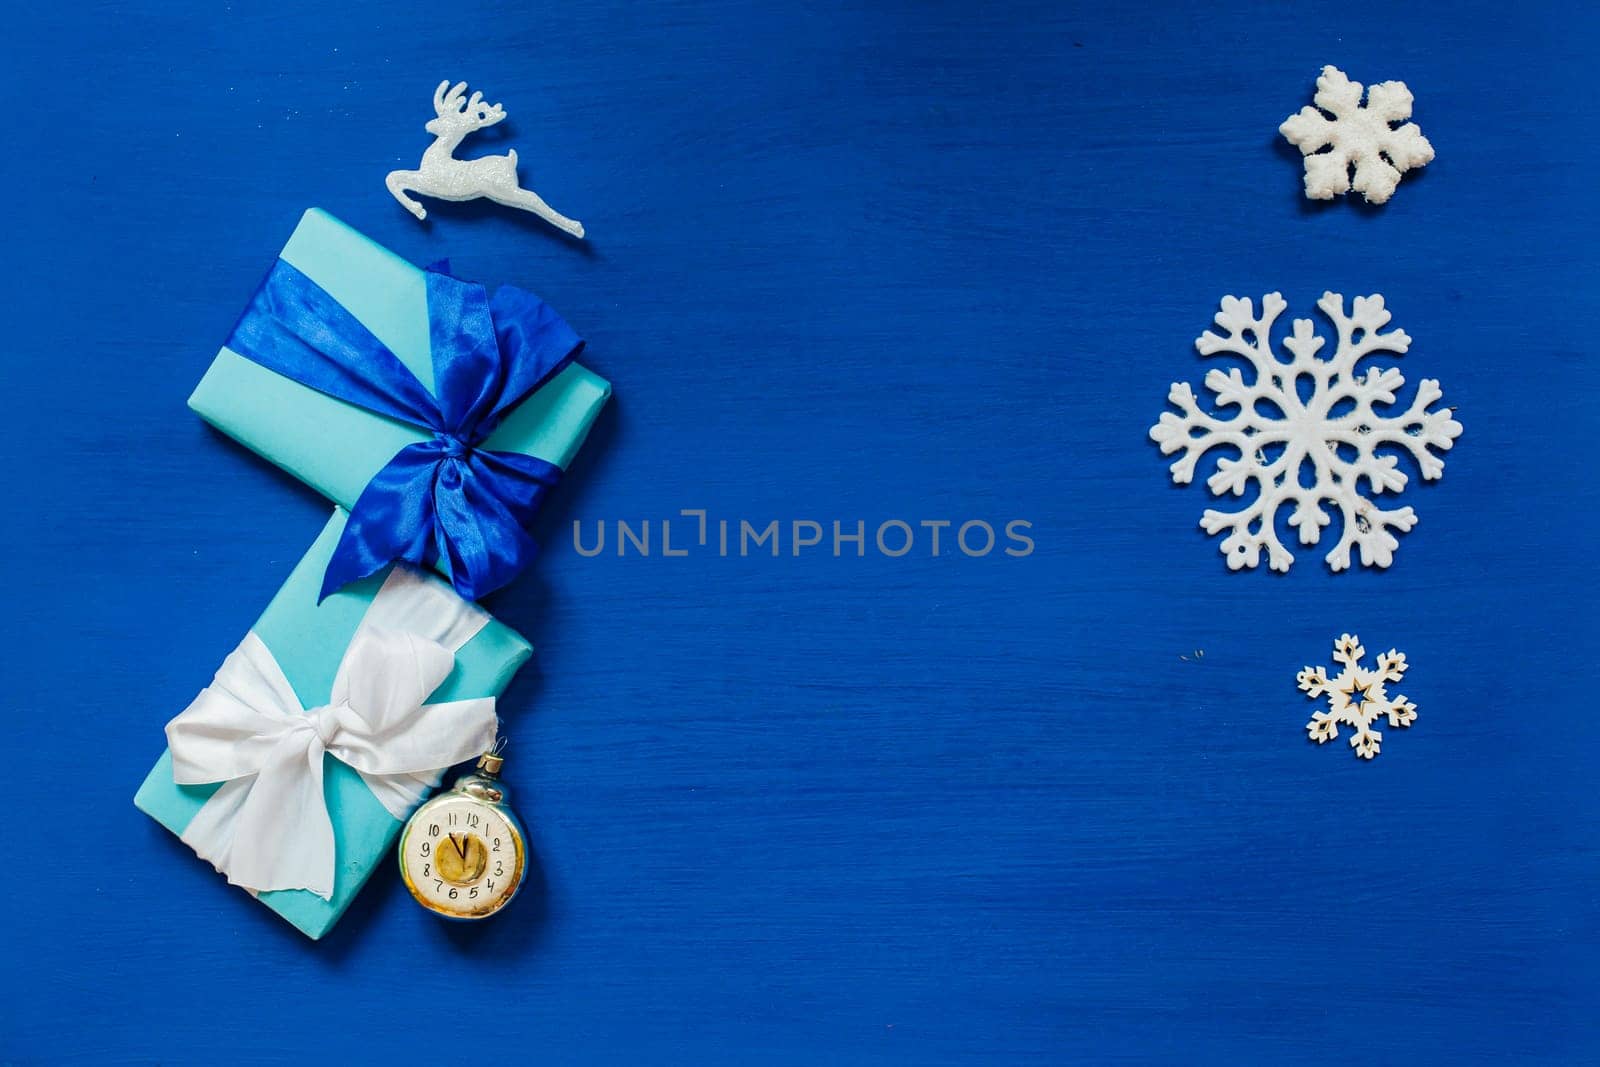 Christmas card decor for the new year against a winter backdrop